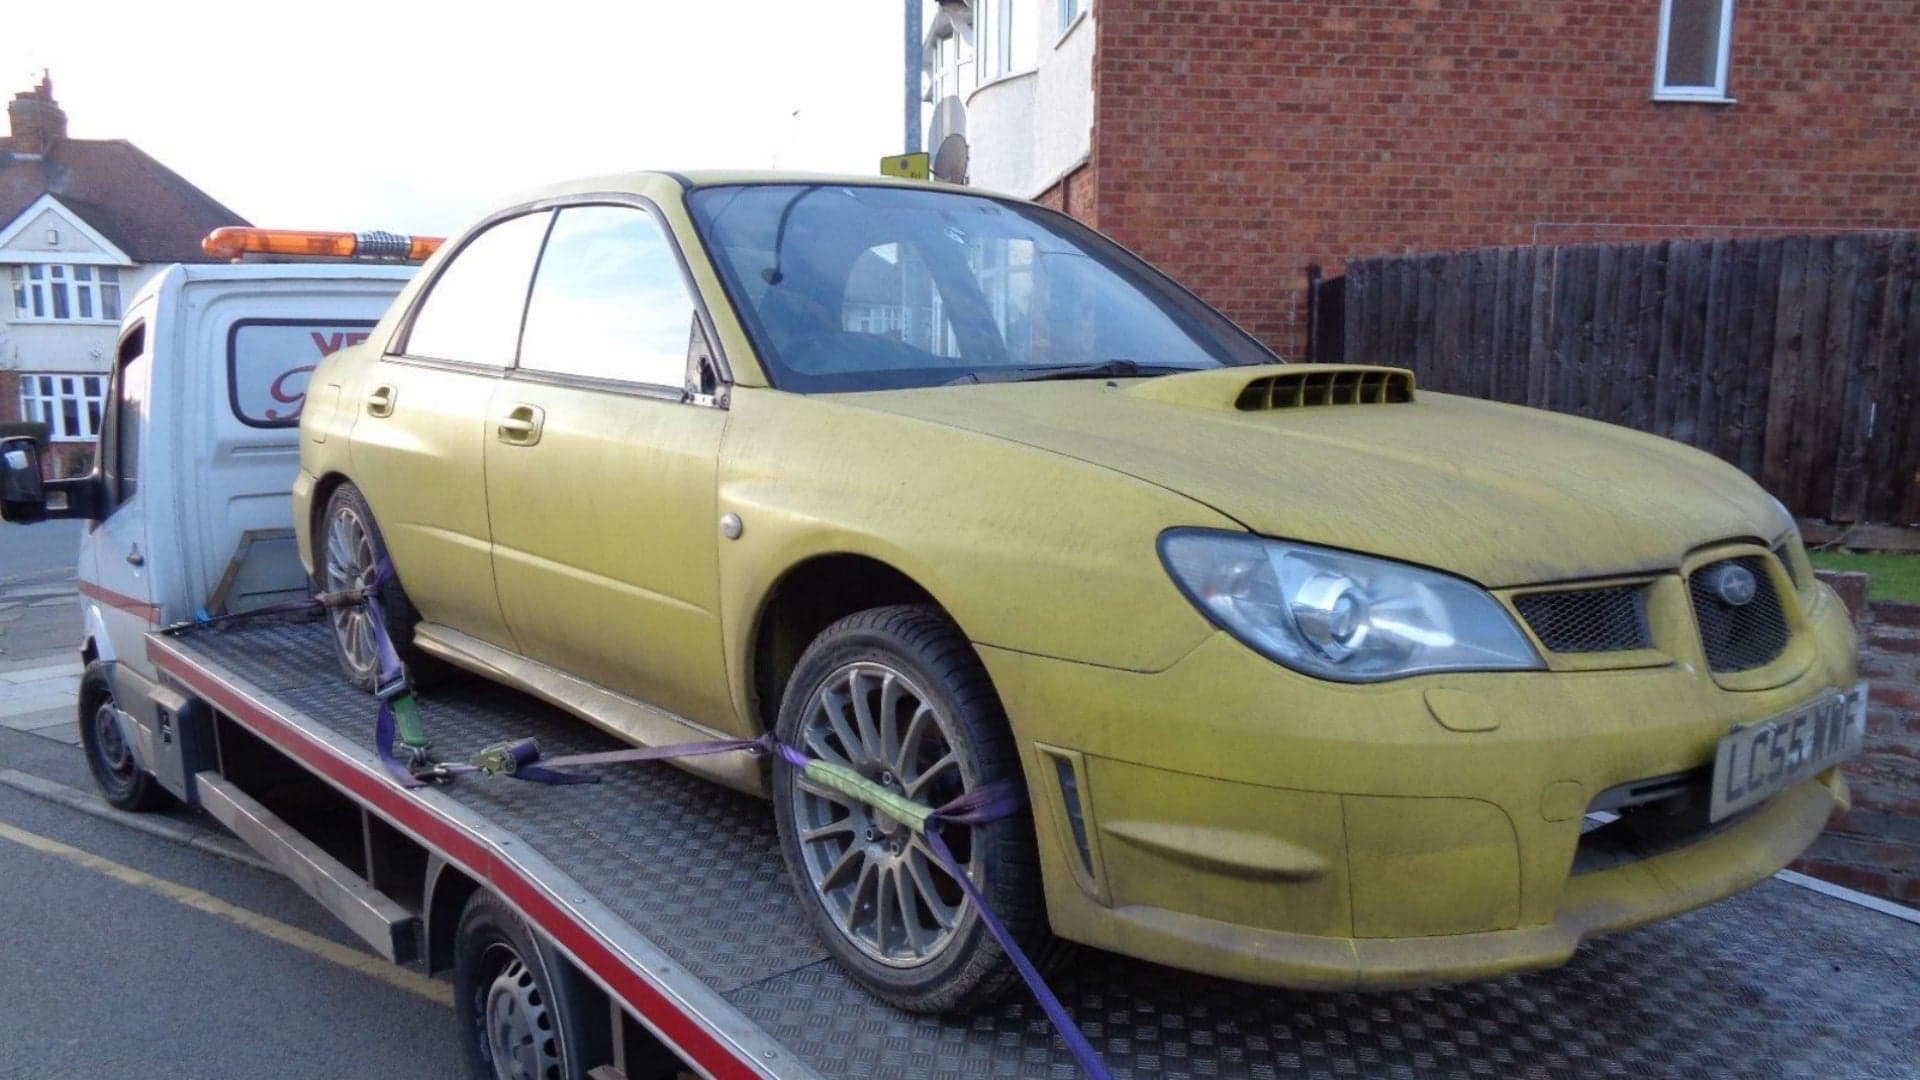 A Subaru WRX STi from Kingsman Is For Sale, But There’s a Catch